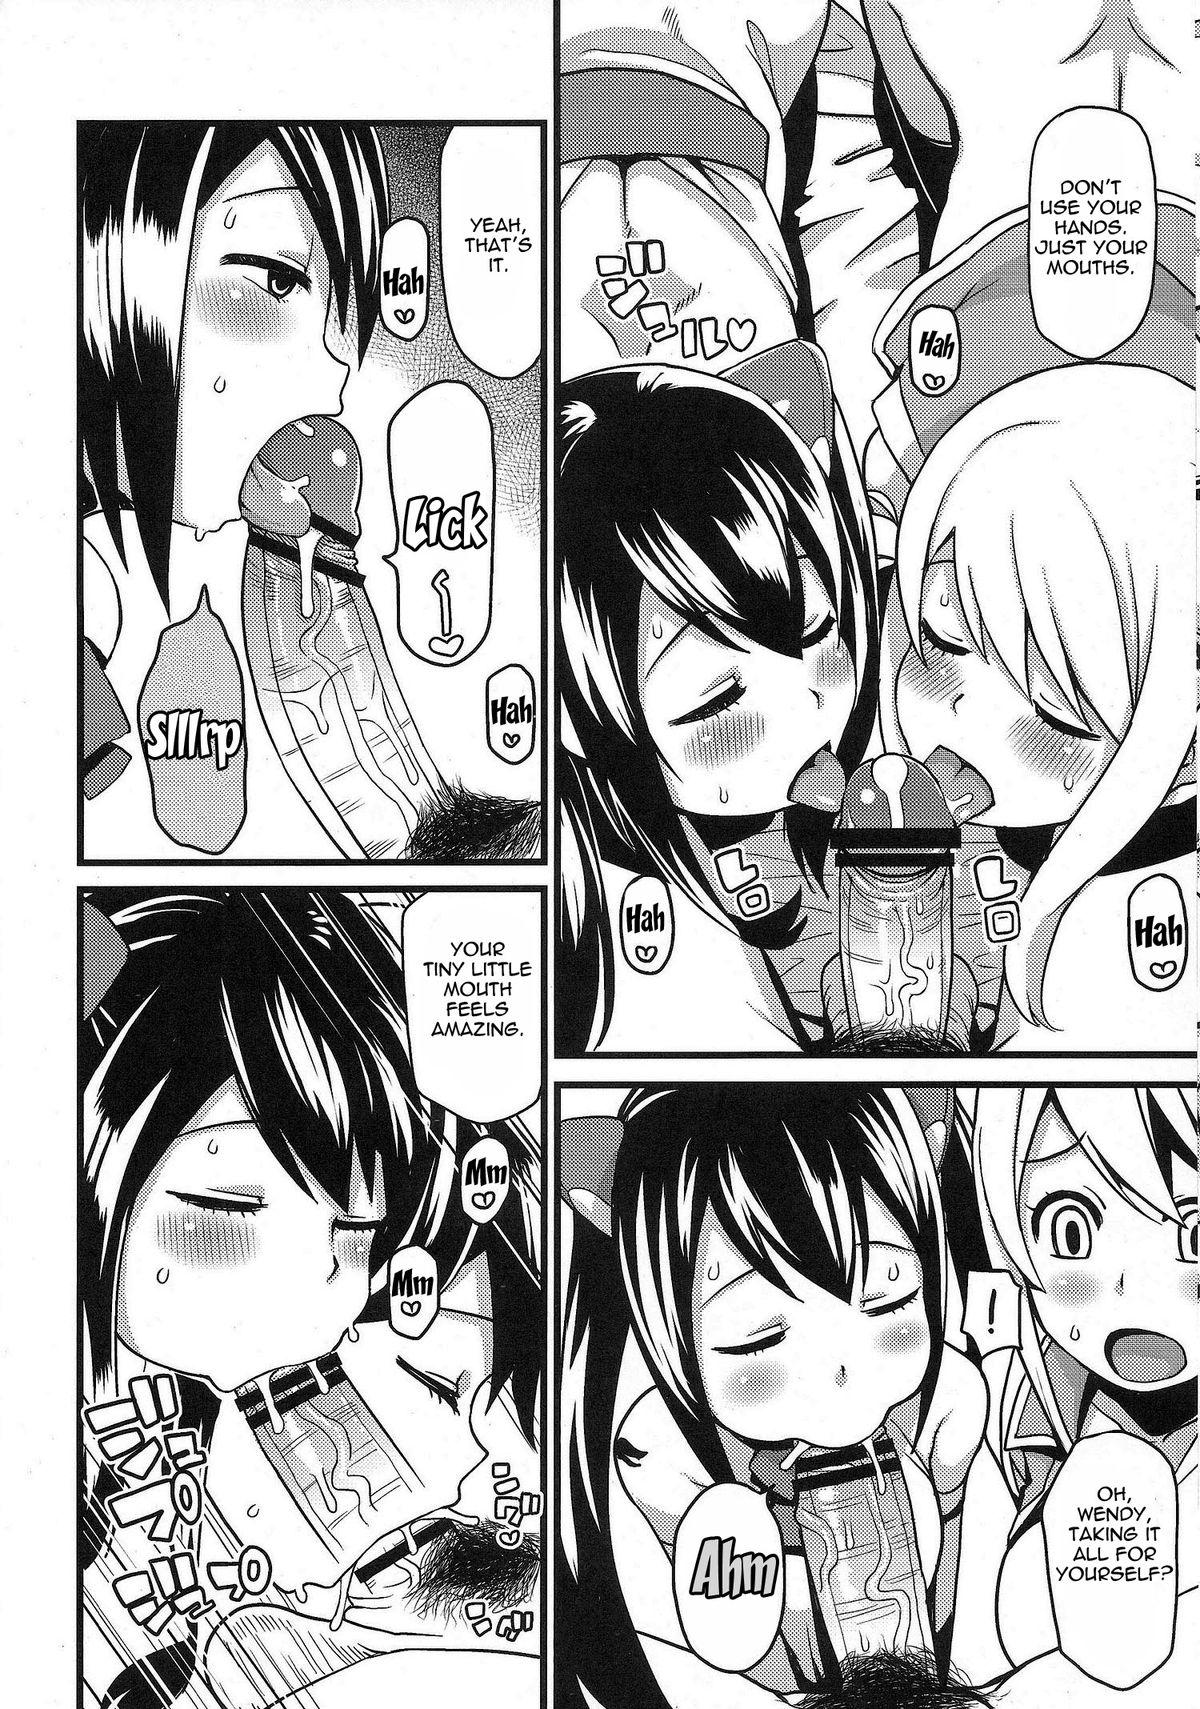 Emo Gay Chichikko Bitch 2 - Fairy tail Sister - Page 8